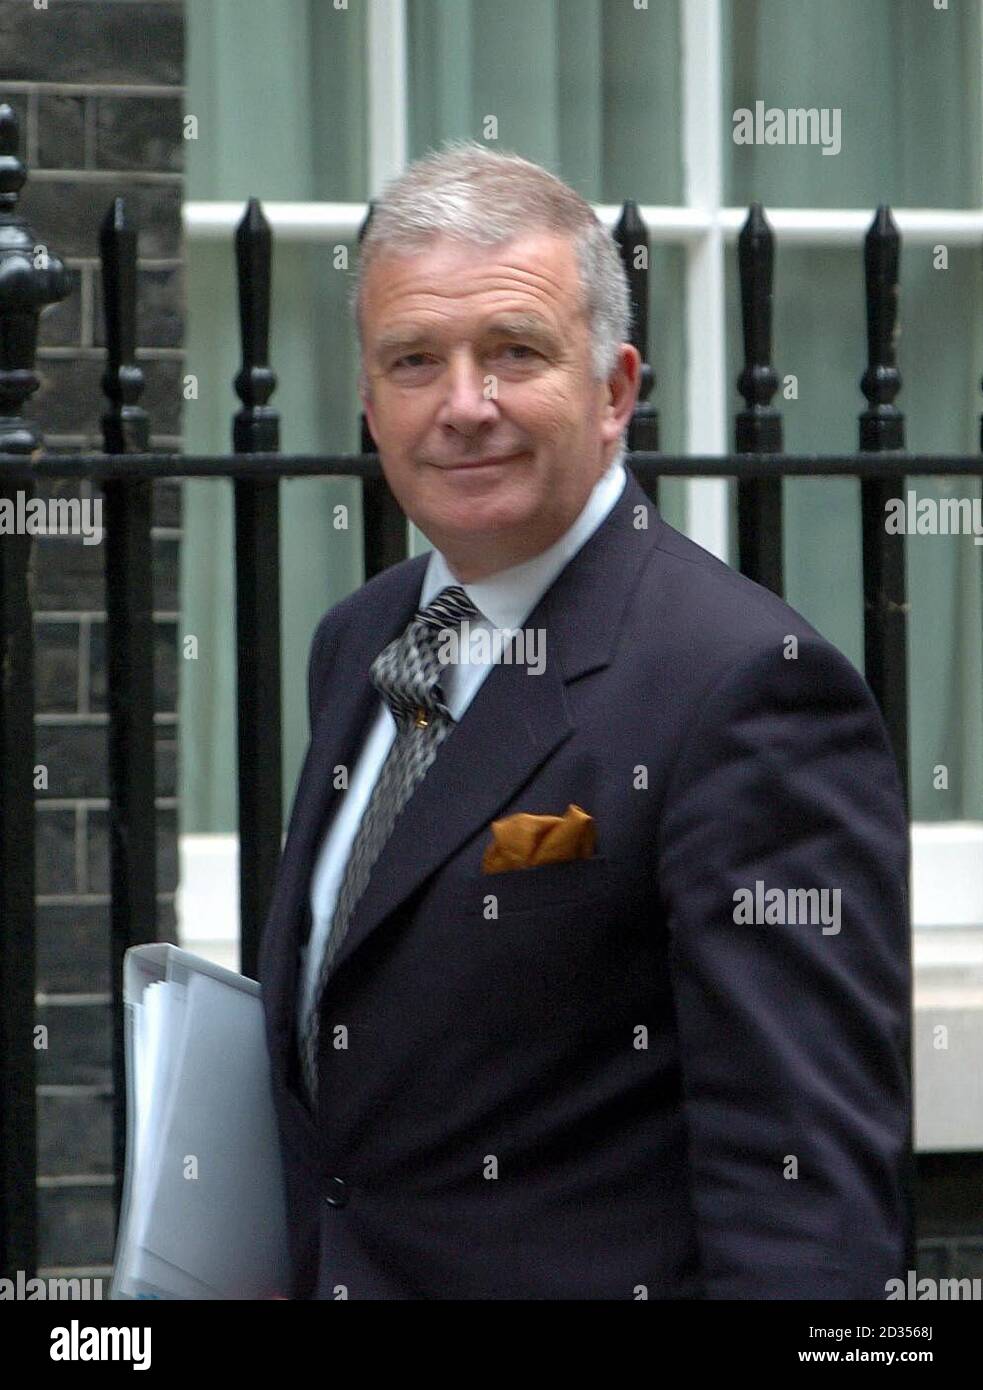 Security minster Admiral Sir Alan West arrives for the first meeting of the National Security Council at No 10 Downing Street. Stock Photo